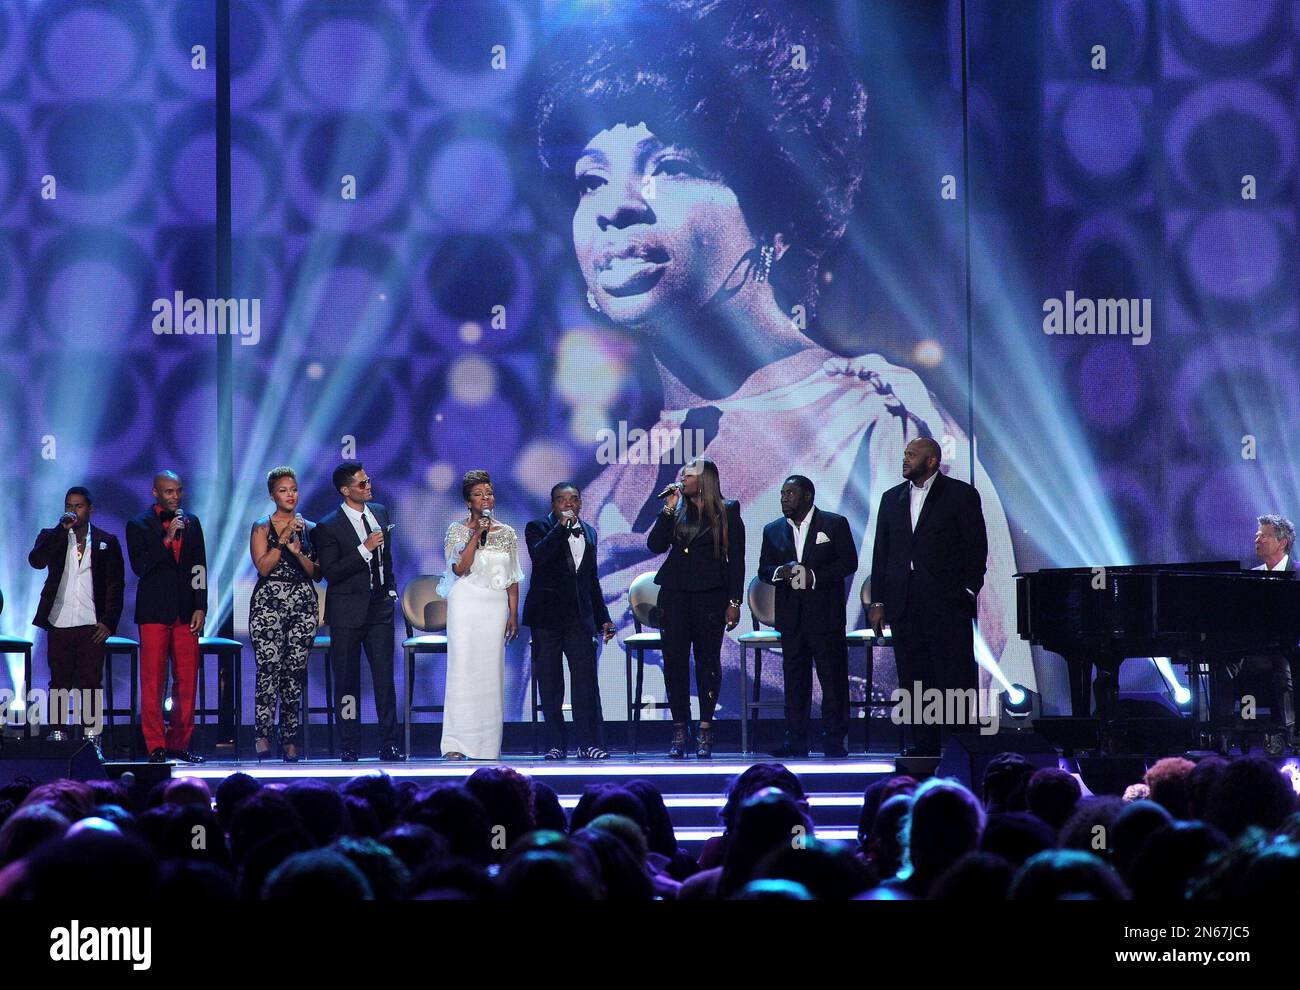 From Left Bobby V Kenny Lattimore Chrisette Michele Eric Benet Gladys Knight Dionne Warwick Ronald Isley Candice Glover Eddie Levert Ruben Studdard Debbie Allen And David Foster Onstage At The 2013 Soul Train Awards At The Orleans Arena On Friday Nov 8 2013 In Las Vegas Photo By Frank Micelottainvisionap 2N67JC5 